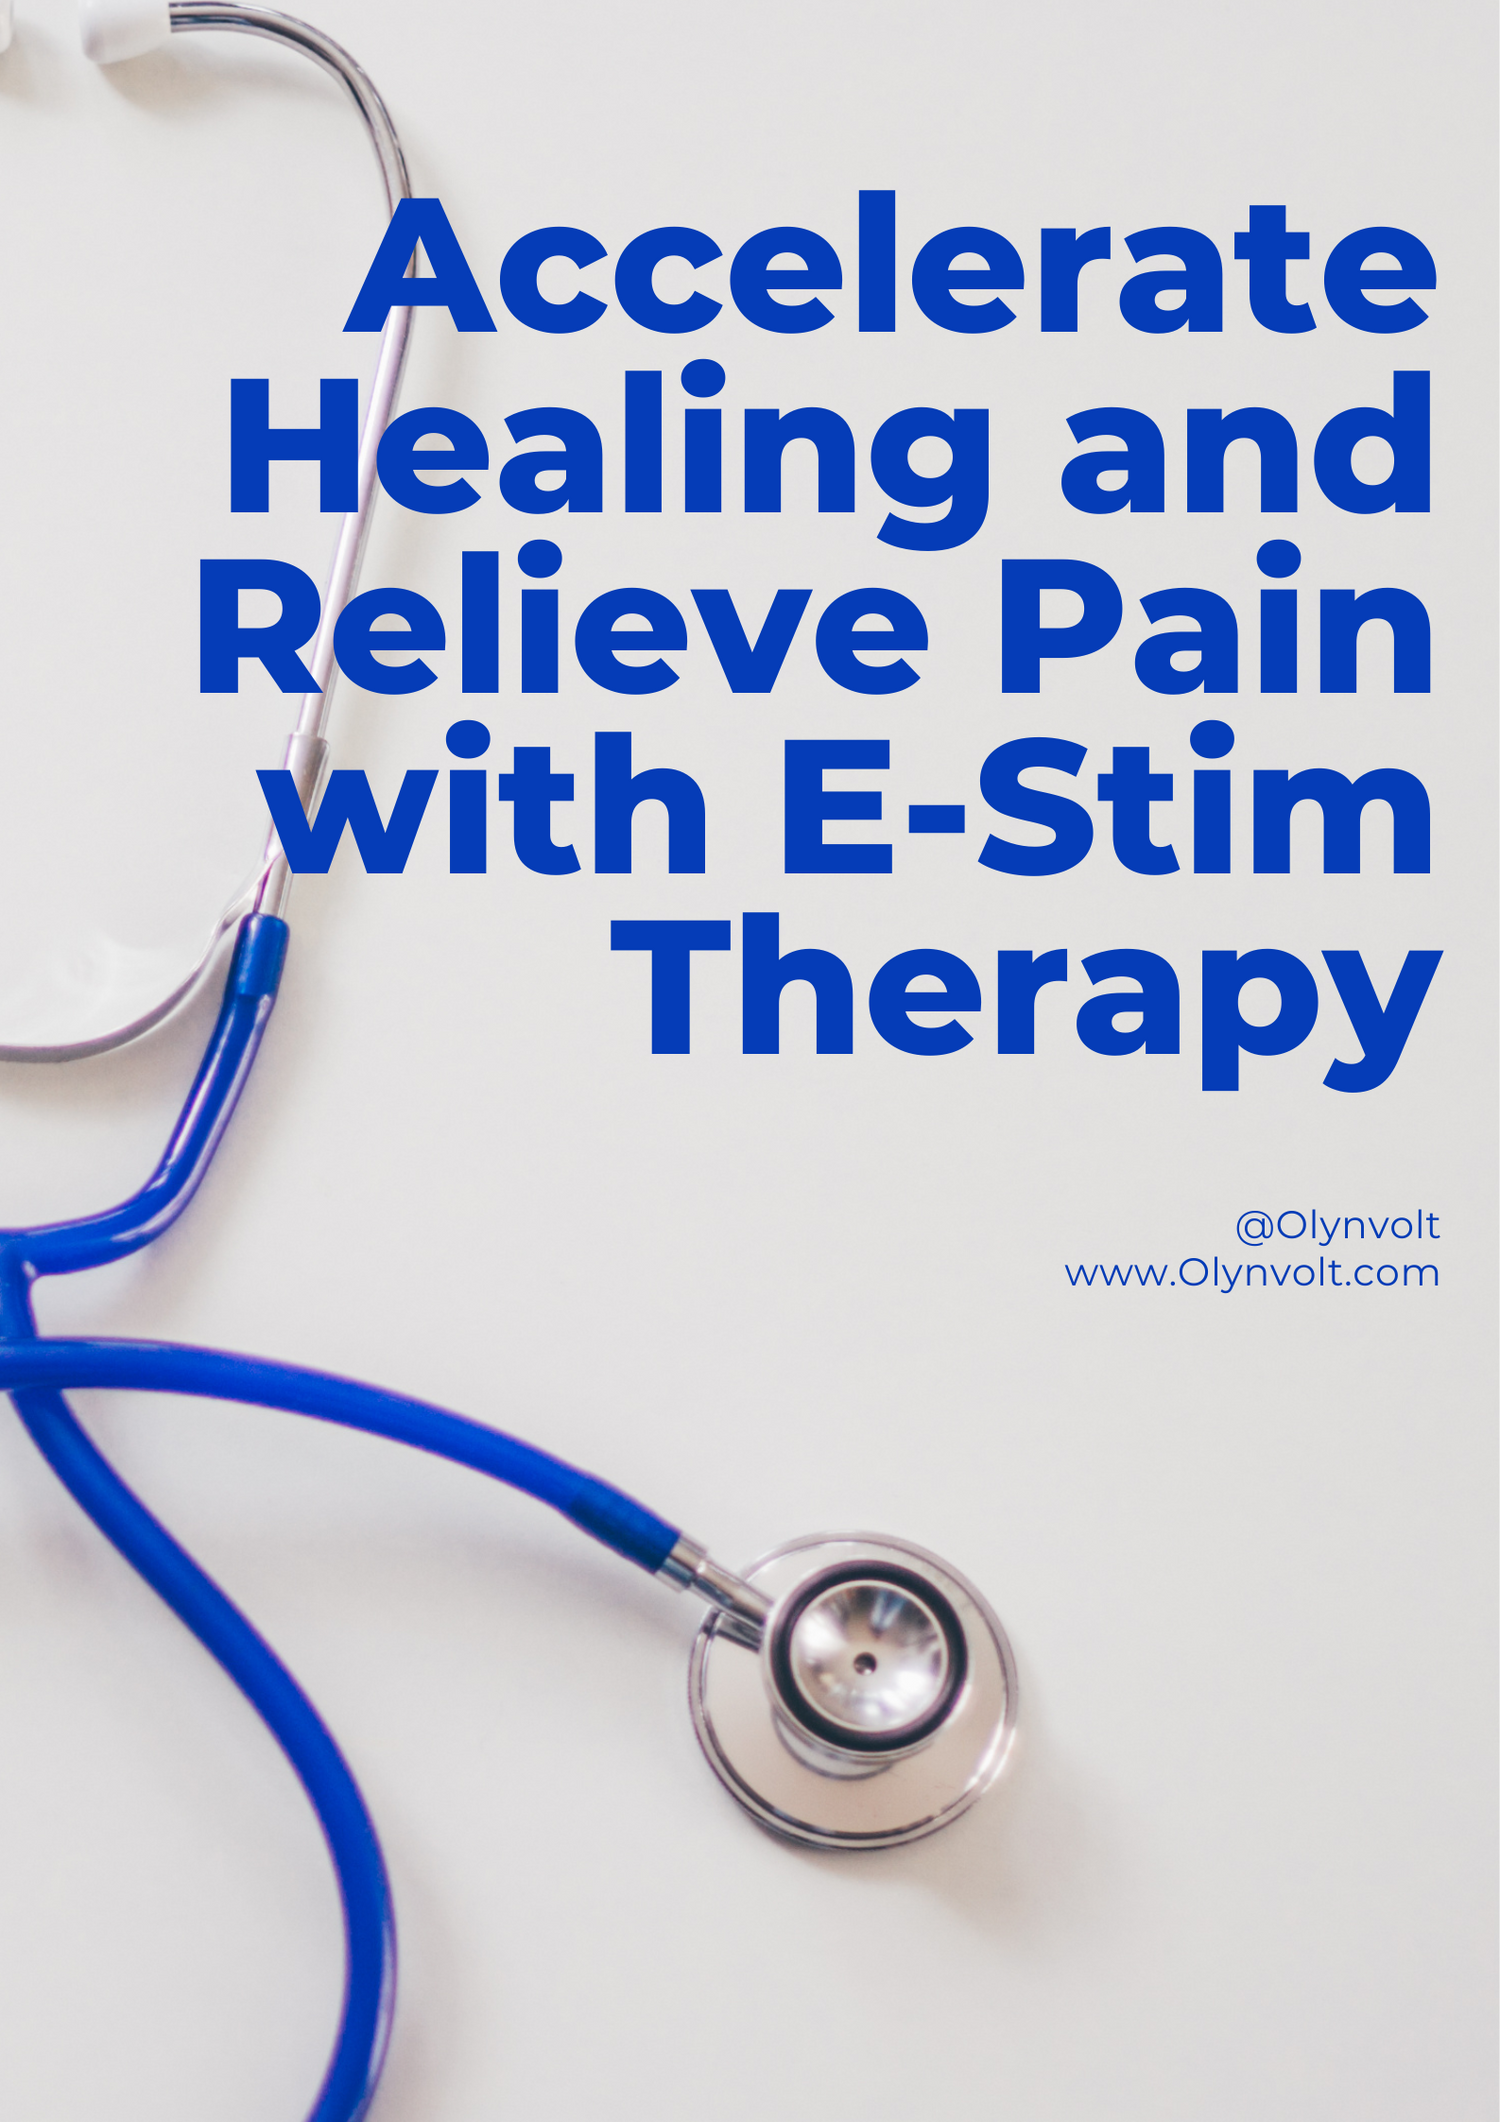 Accelerate Healing and Relieve Pain with E-Stim Therapy